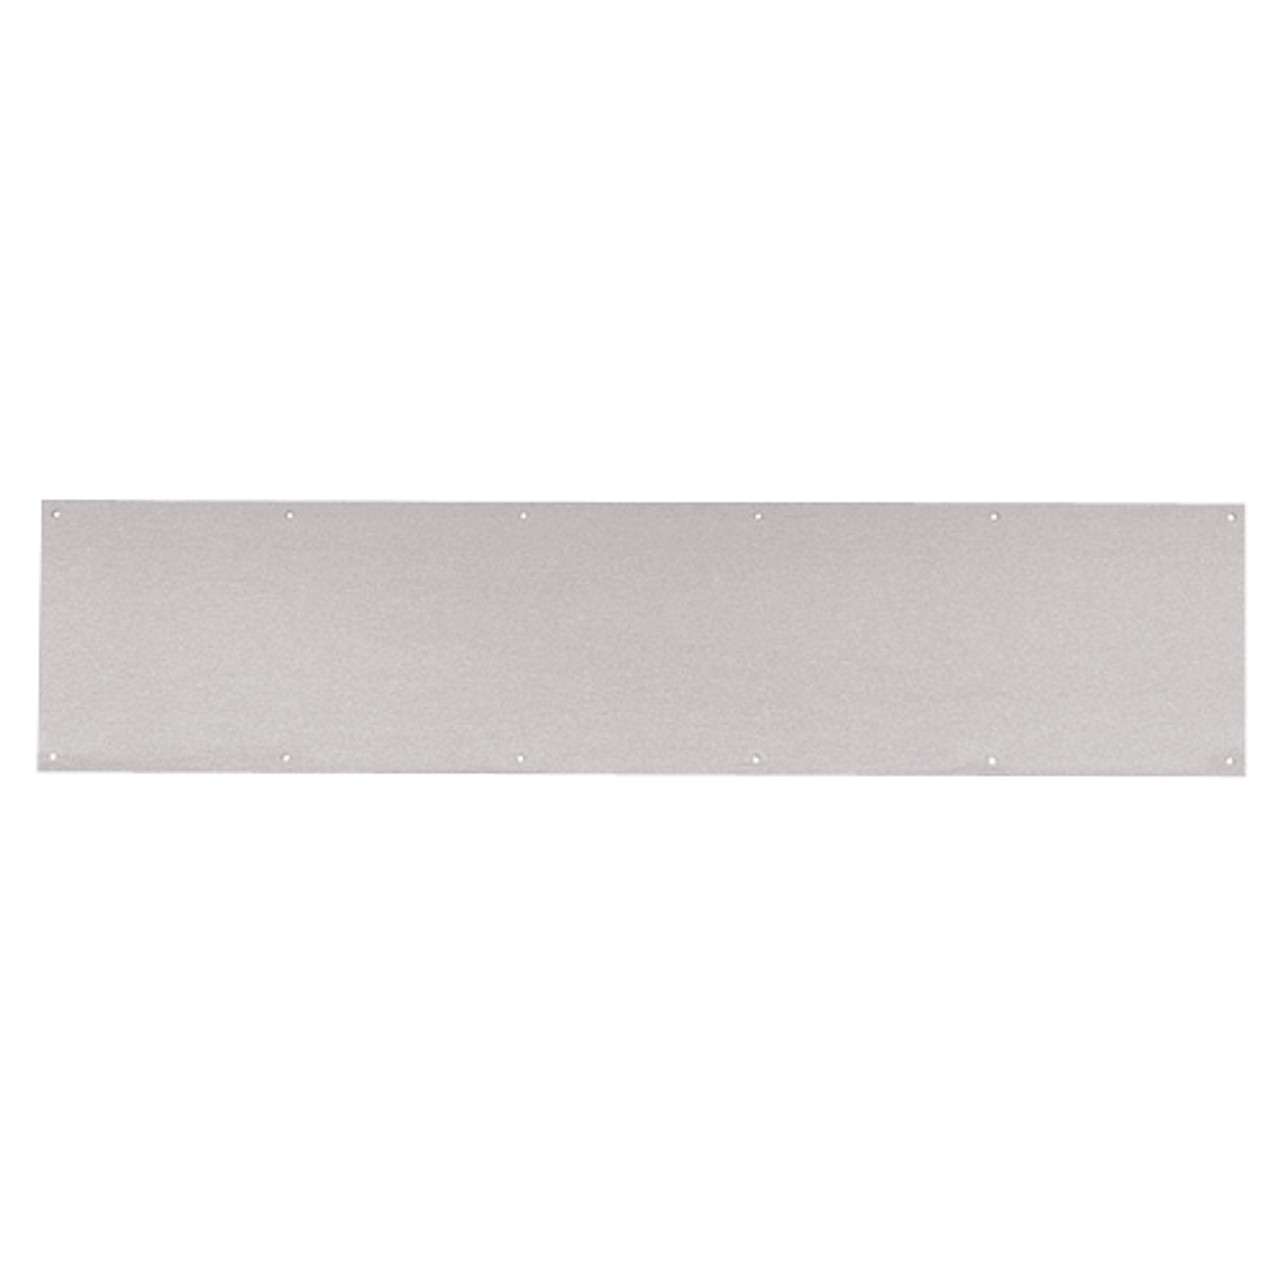 8400-US32D-12x35-B-CS Ives 8400 Series Protection Plate in Satin Stainless Steel